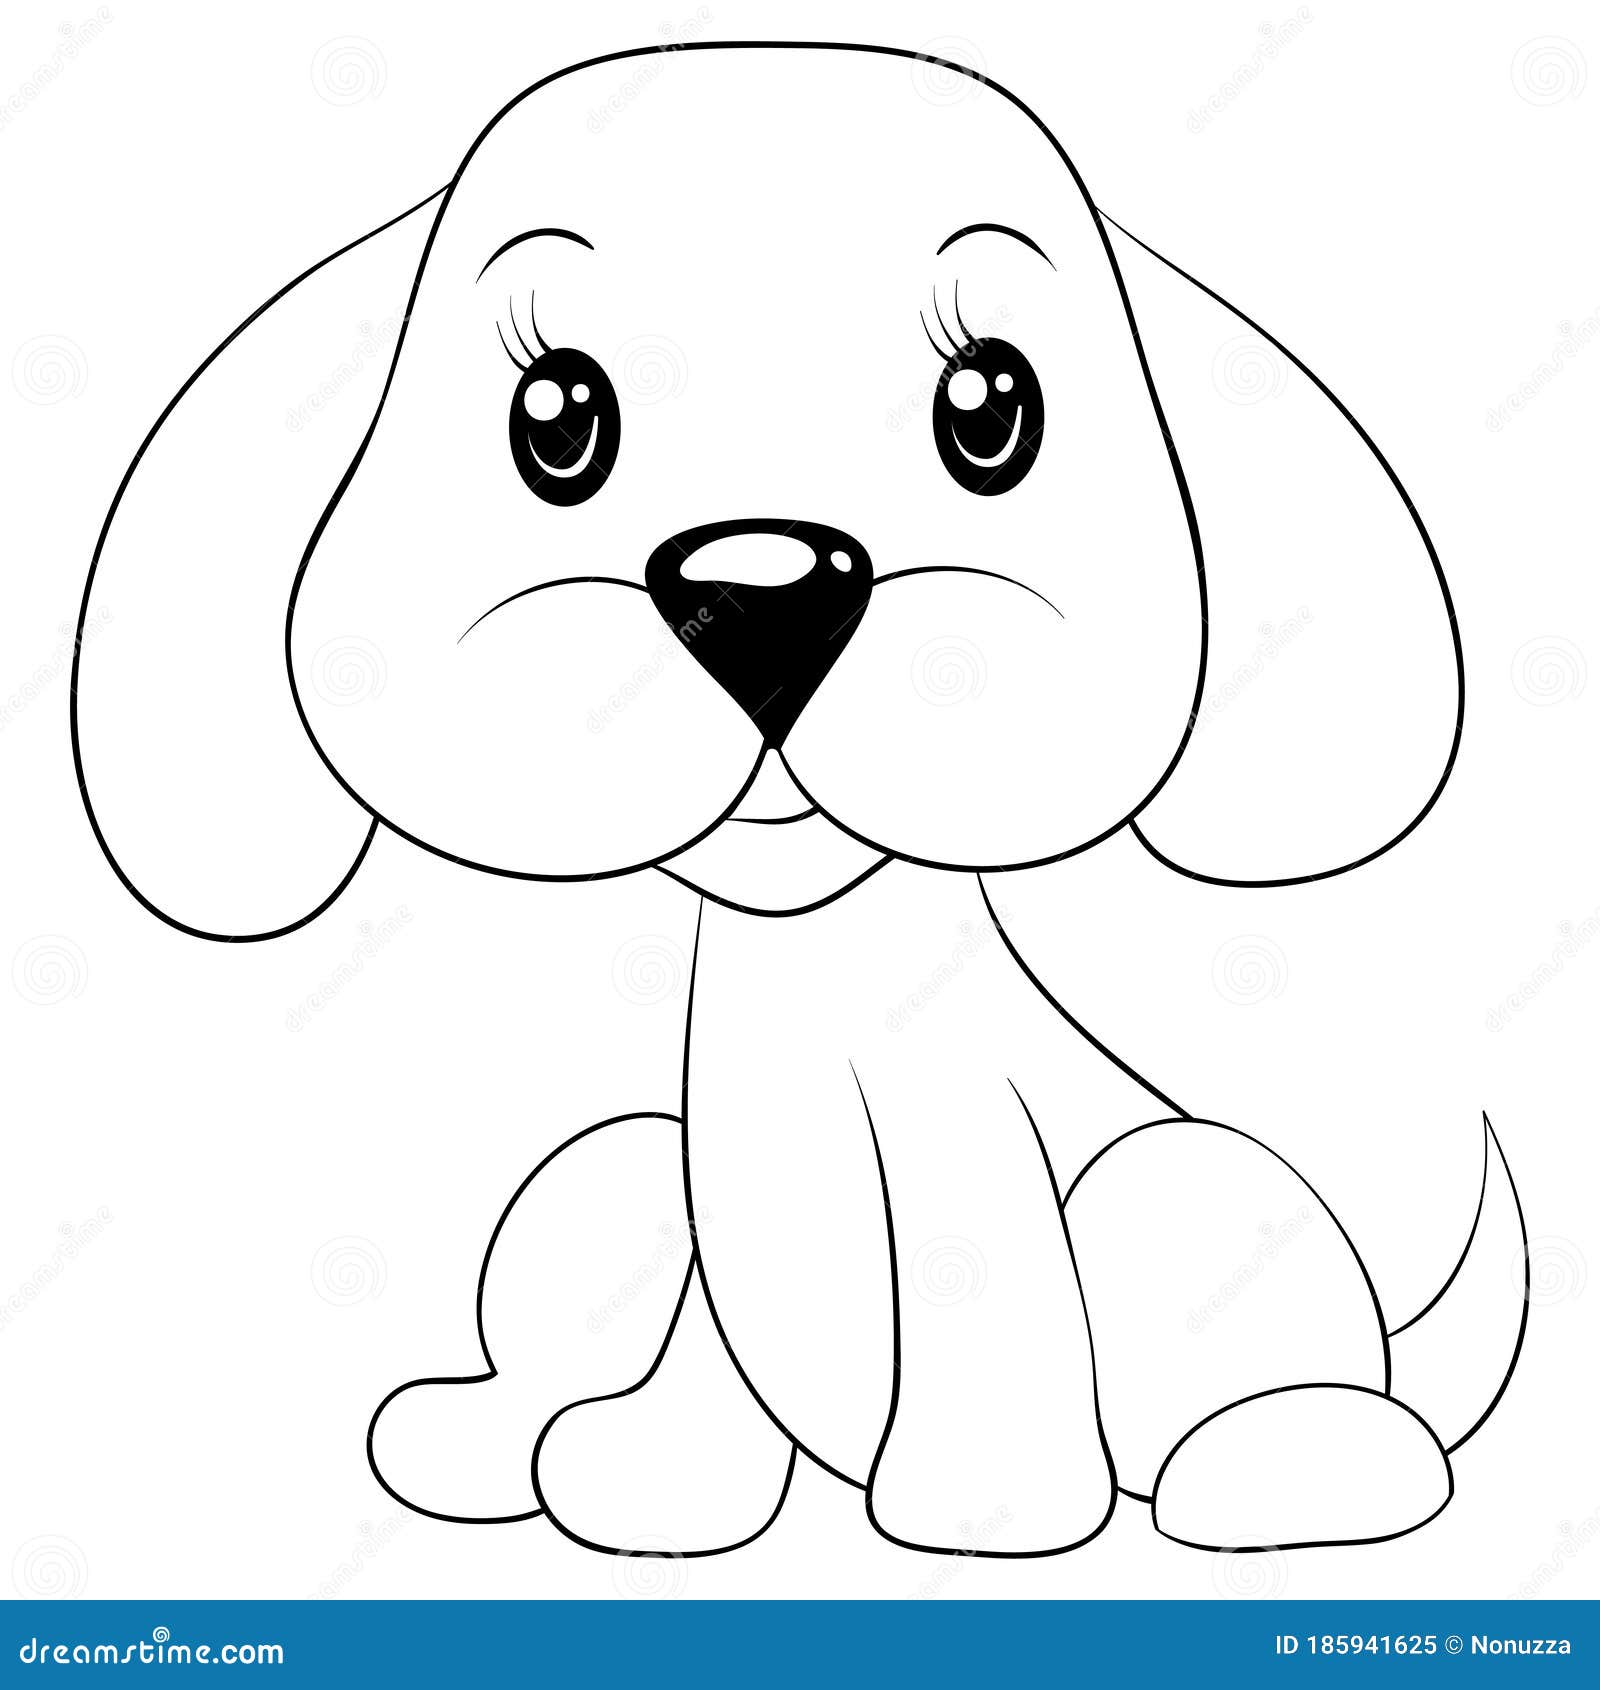 A Children Coloring Book,page A Cartoon Dog Image For